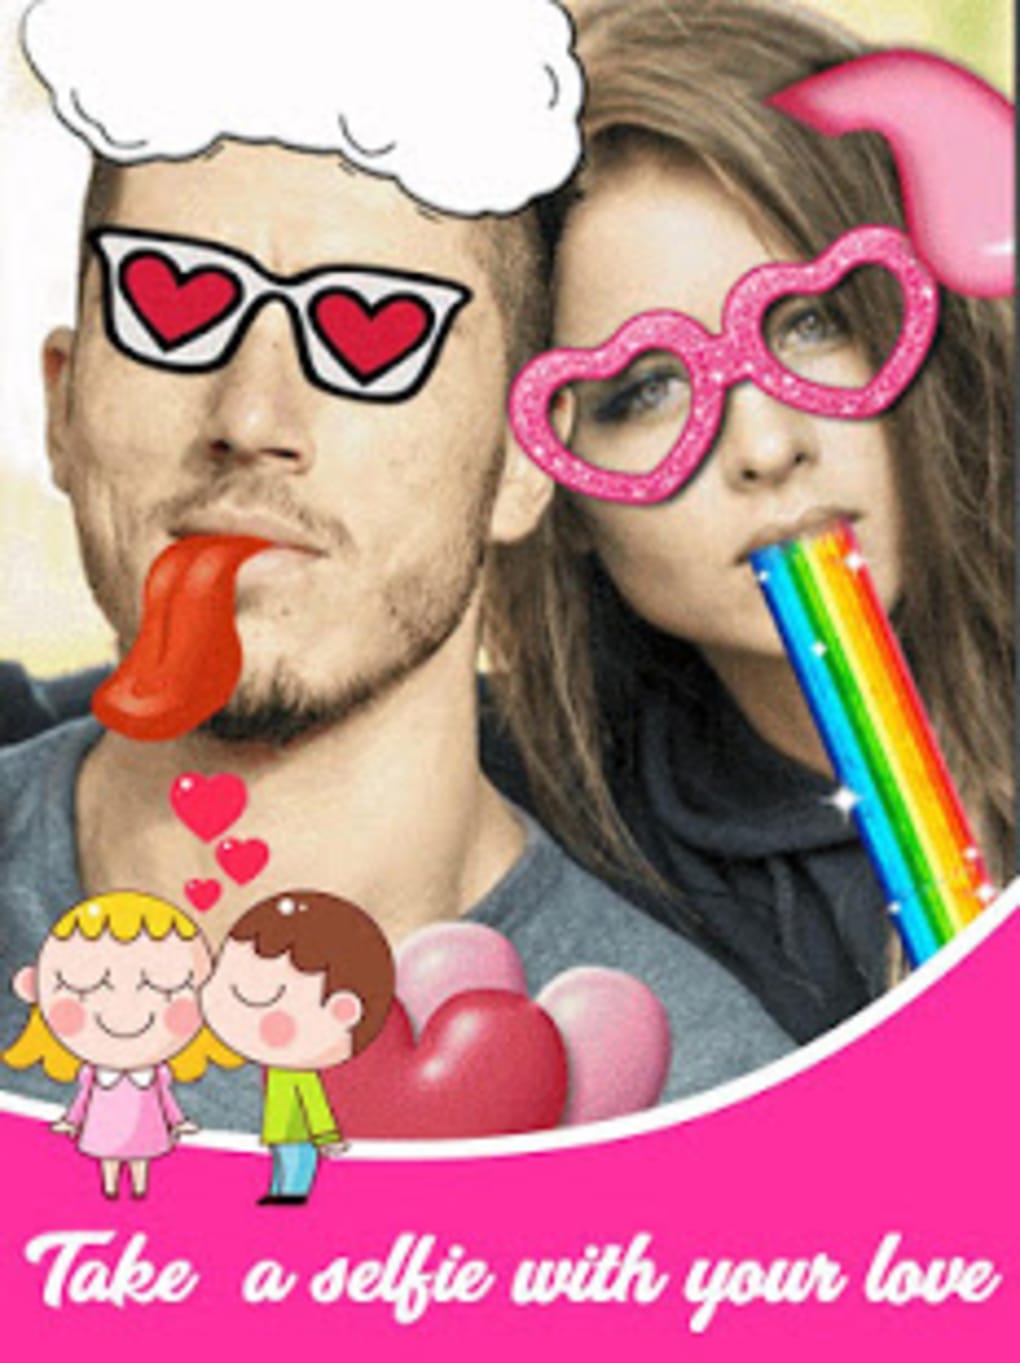 Funny Photo Editor APK for Android - Download